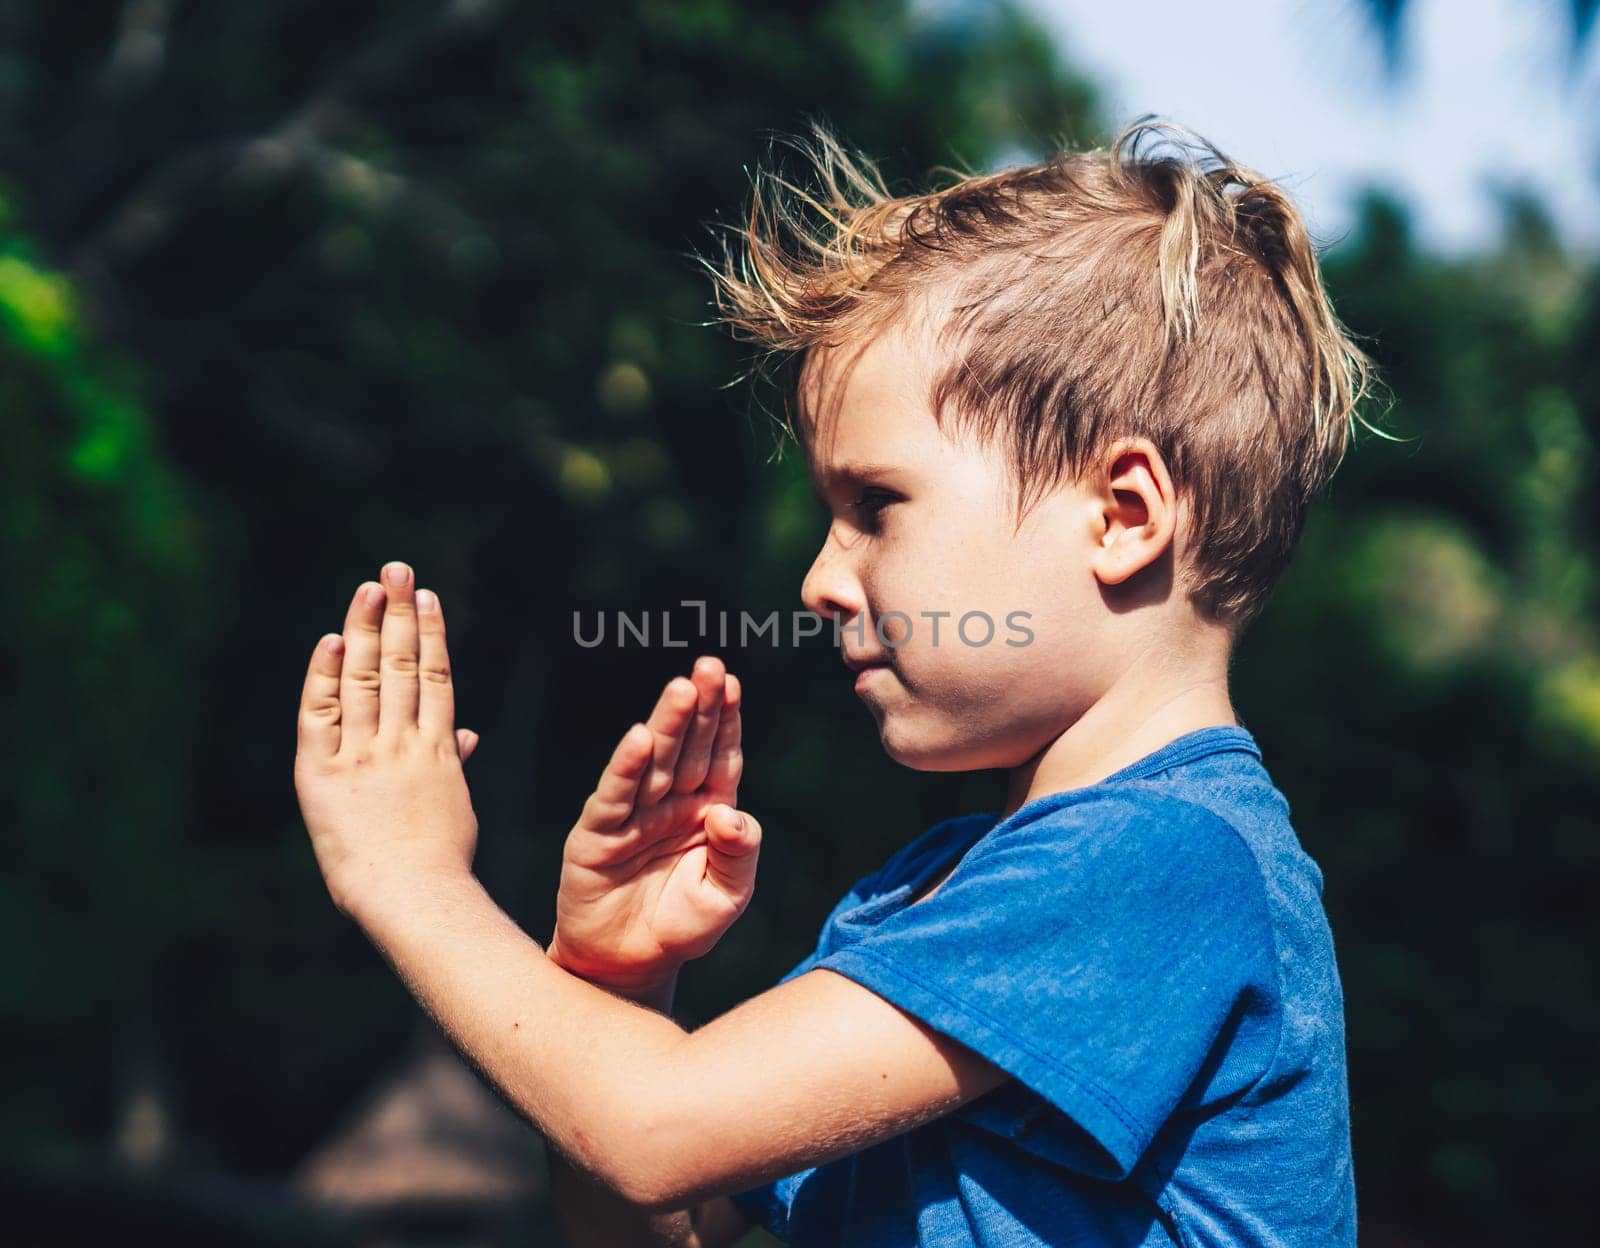 Child boy blue t-shirt karate pose, playing outside summer day. Happy childhood, family education.